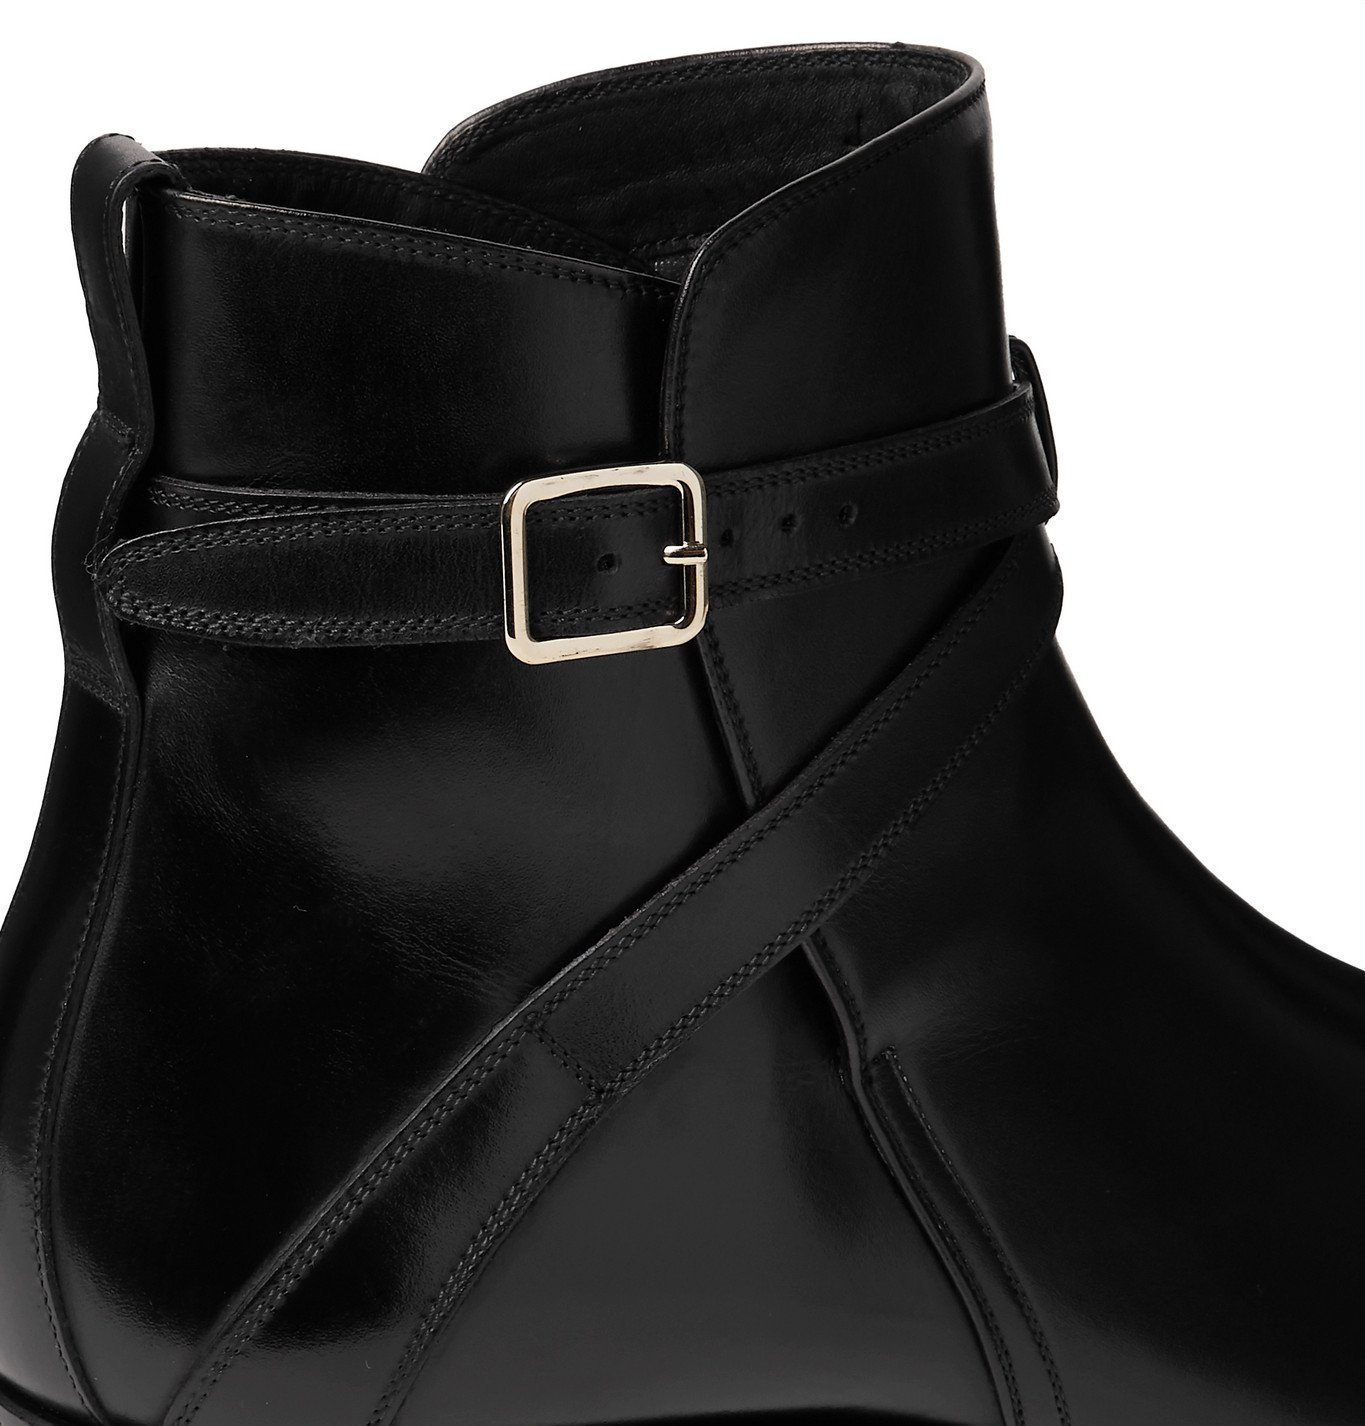 TOM FORD - Rochester Leather Chelsea Boots - Black TOM FORD